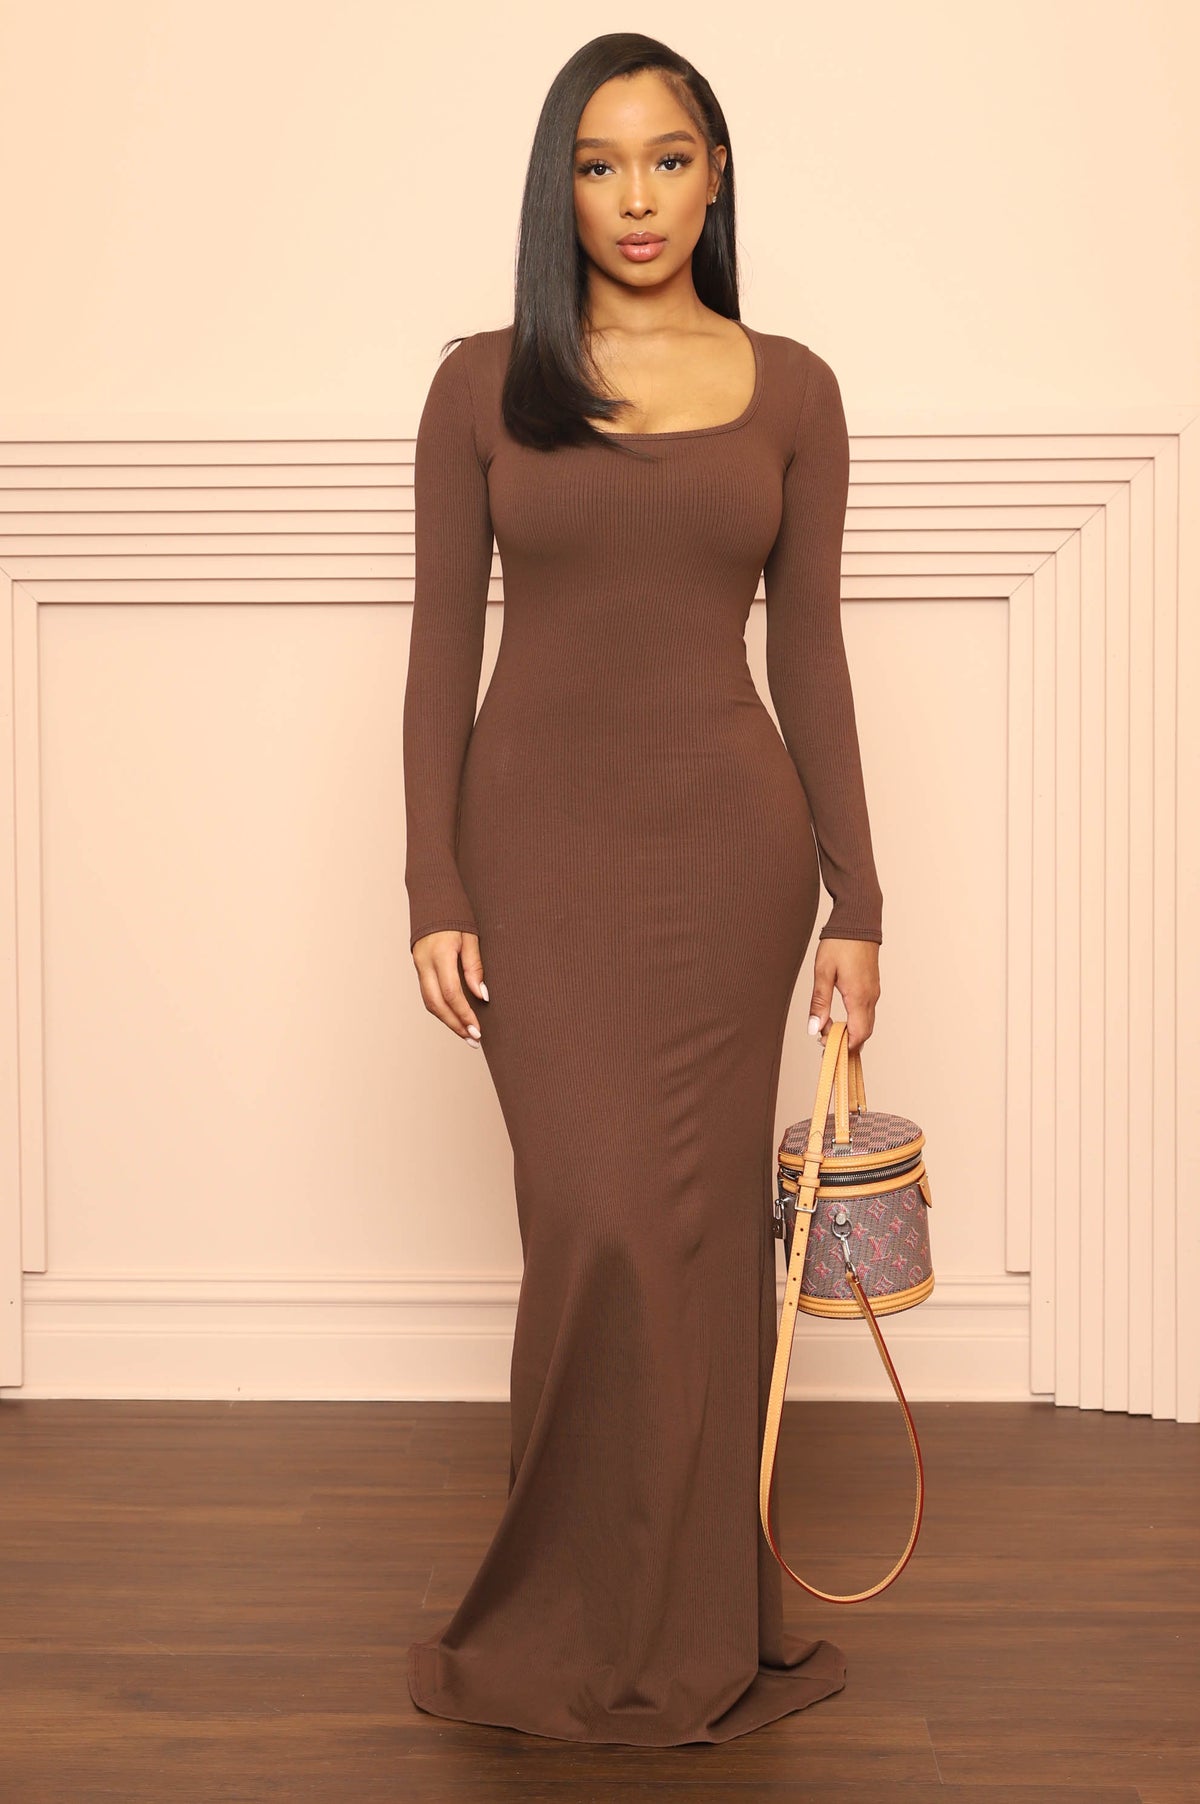 
              Endless Night Cellulite Deleter Scoop Neck Maxi Dress - Cocoa - Swank A Posh
            